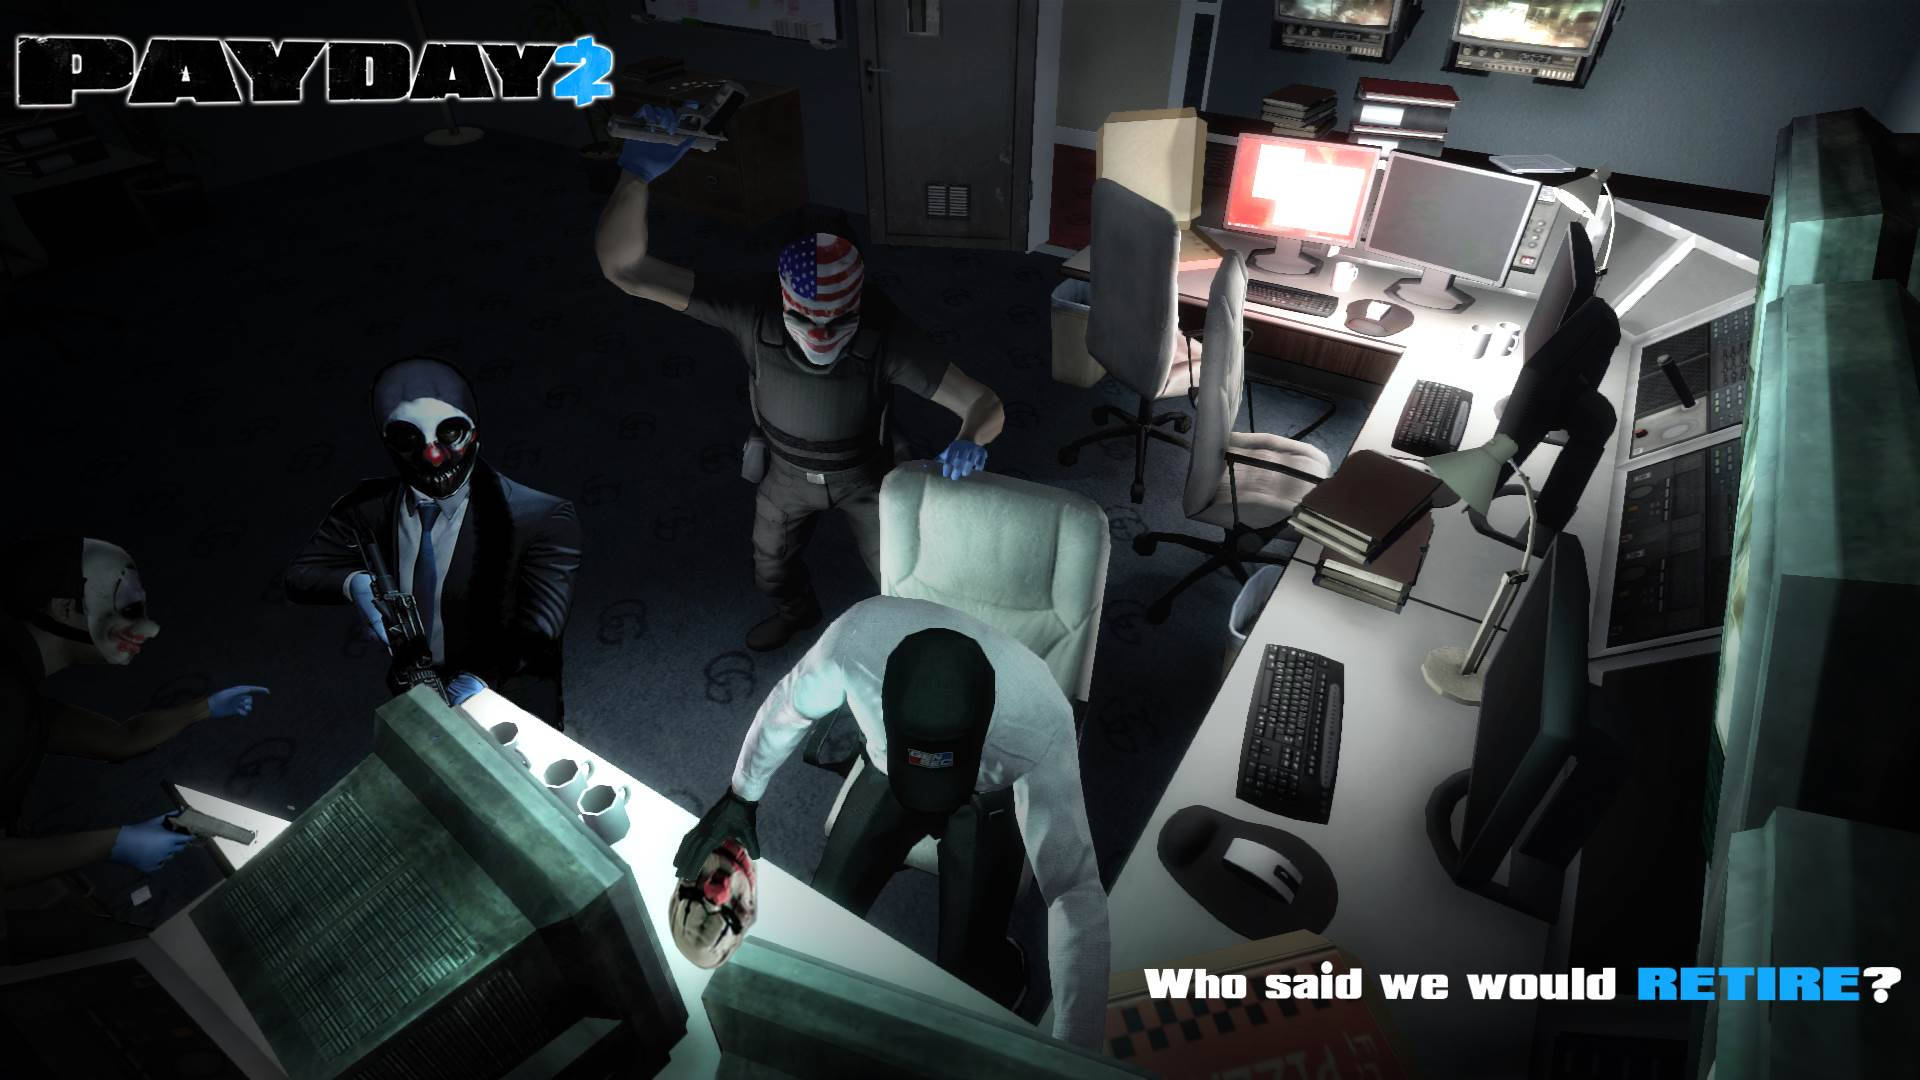 Video Game Payday 2 Crew Caught On Cctv Wallpaper